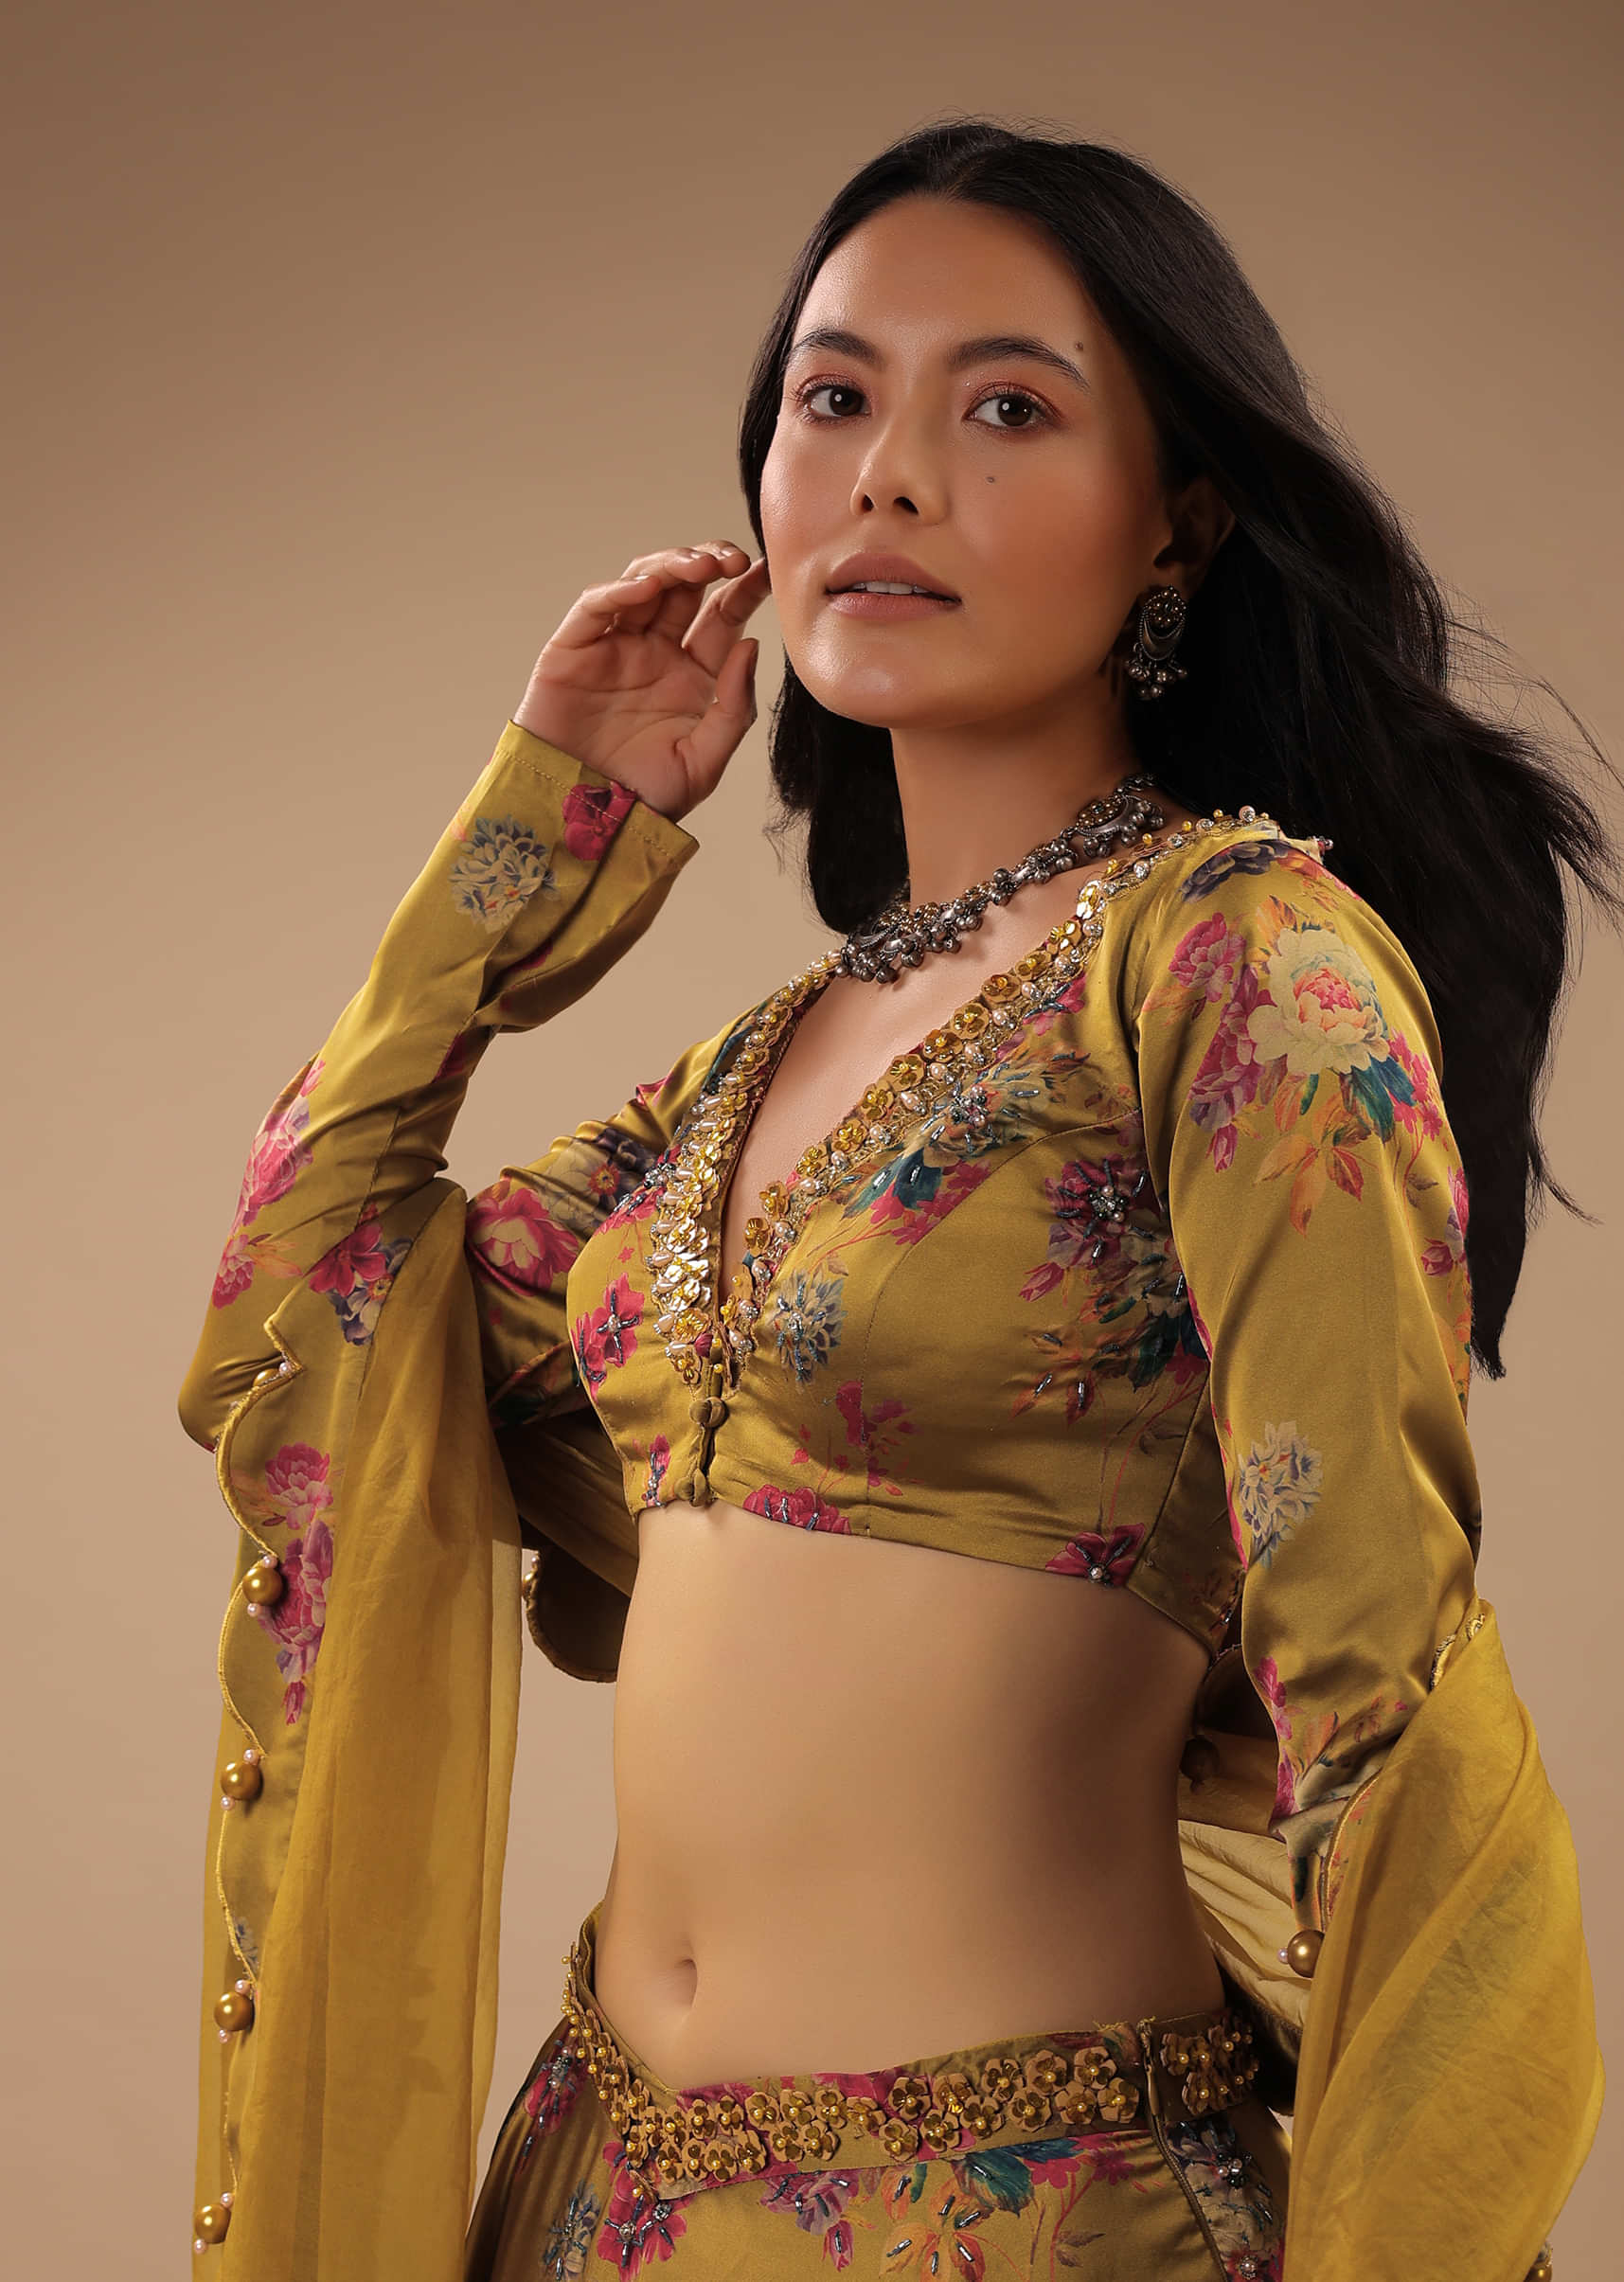 Sulphur Yellow Satin Crop Top And Skirt With Floral Print And Moti Embroidery